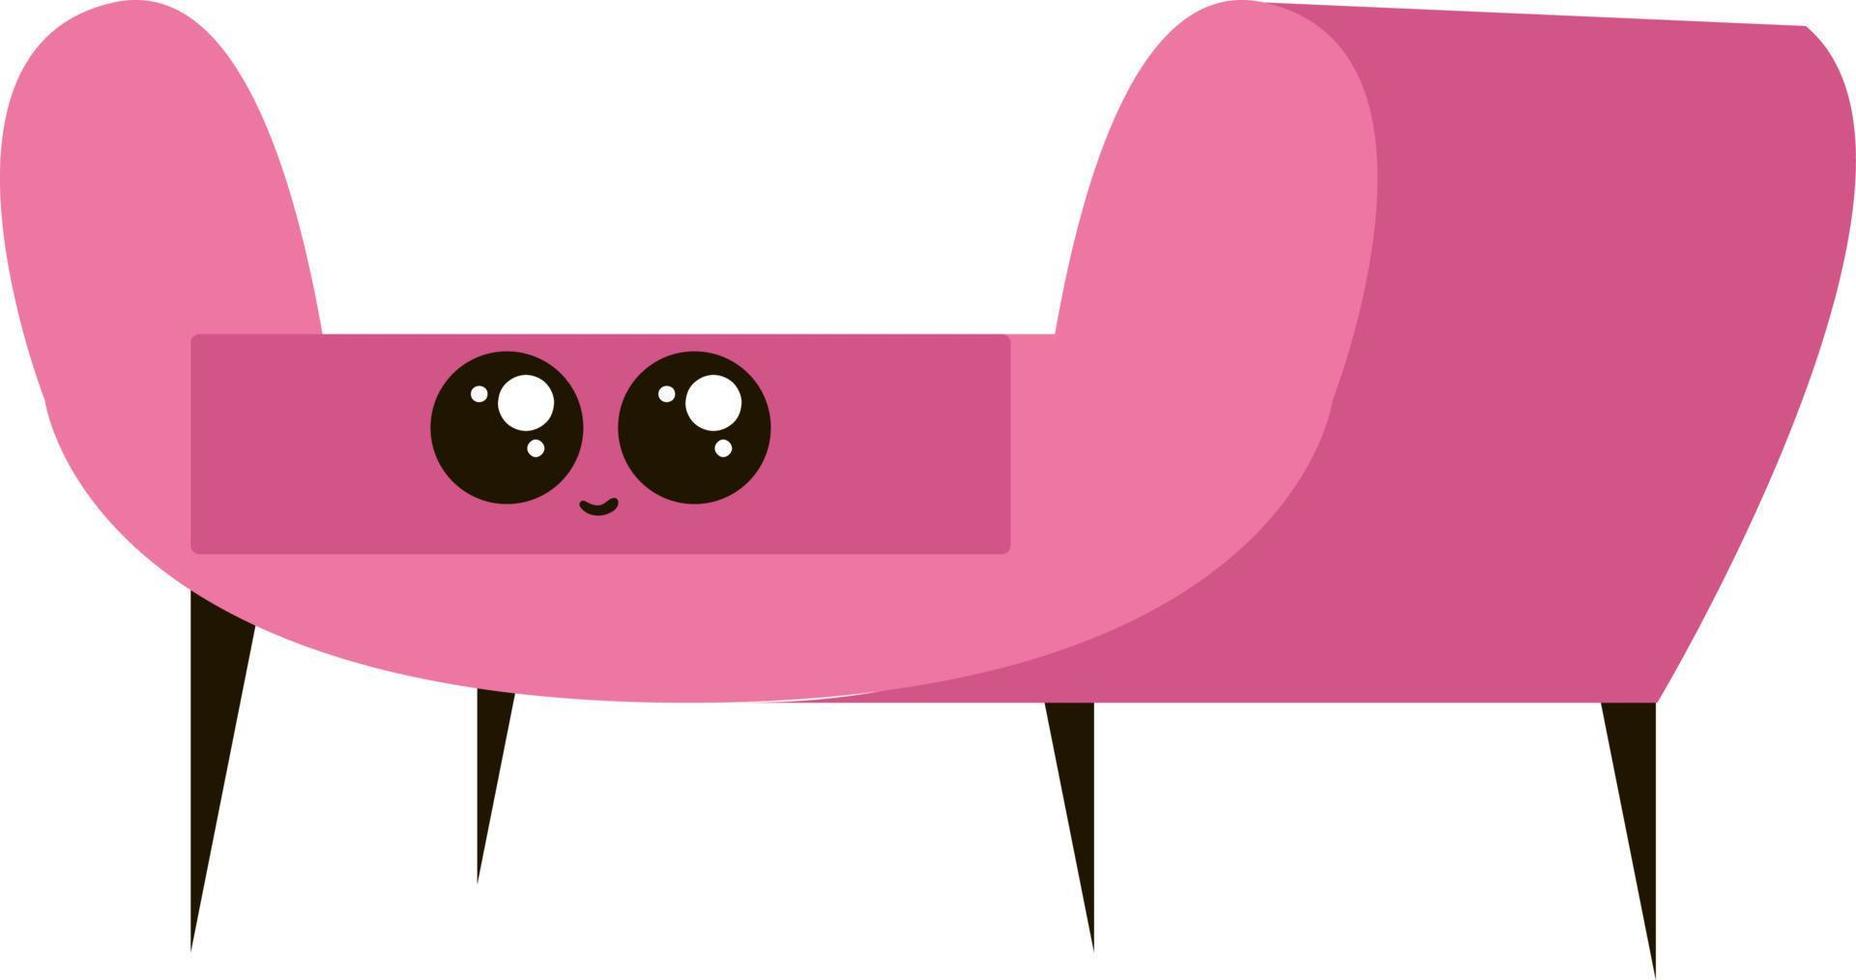 Pink armchair, illustration, vector on white background